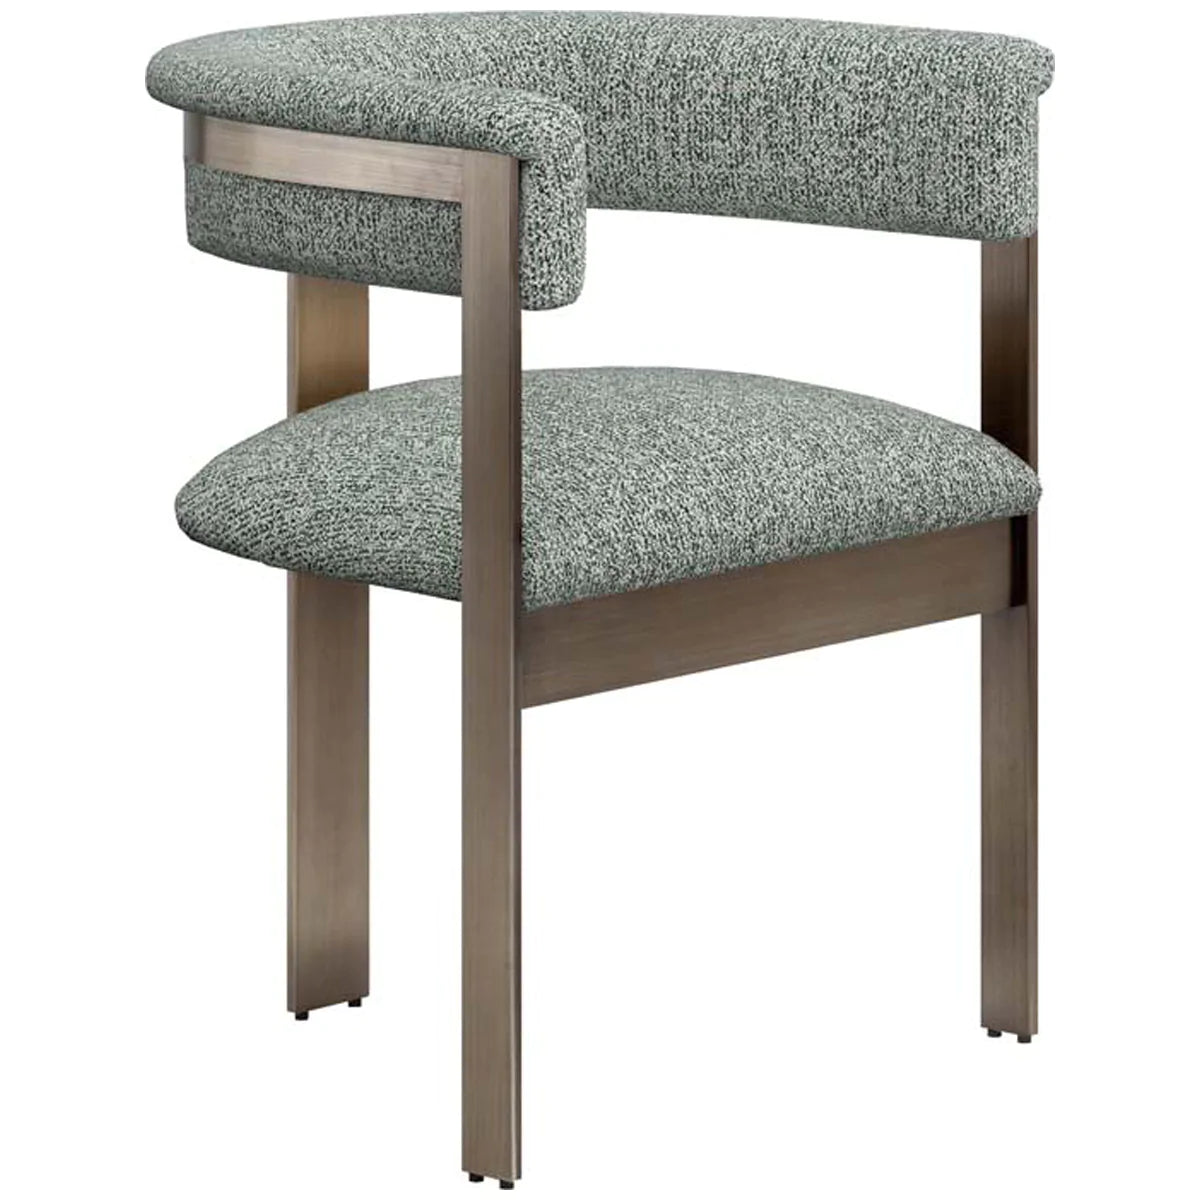 Interlude Home Darcy Dining Chair - Pool